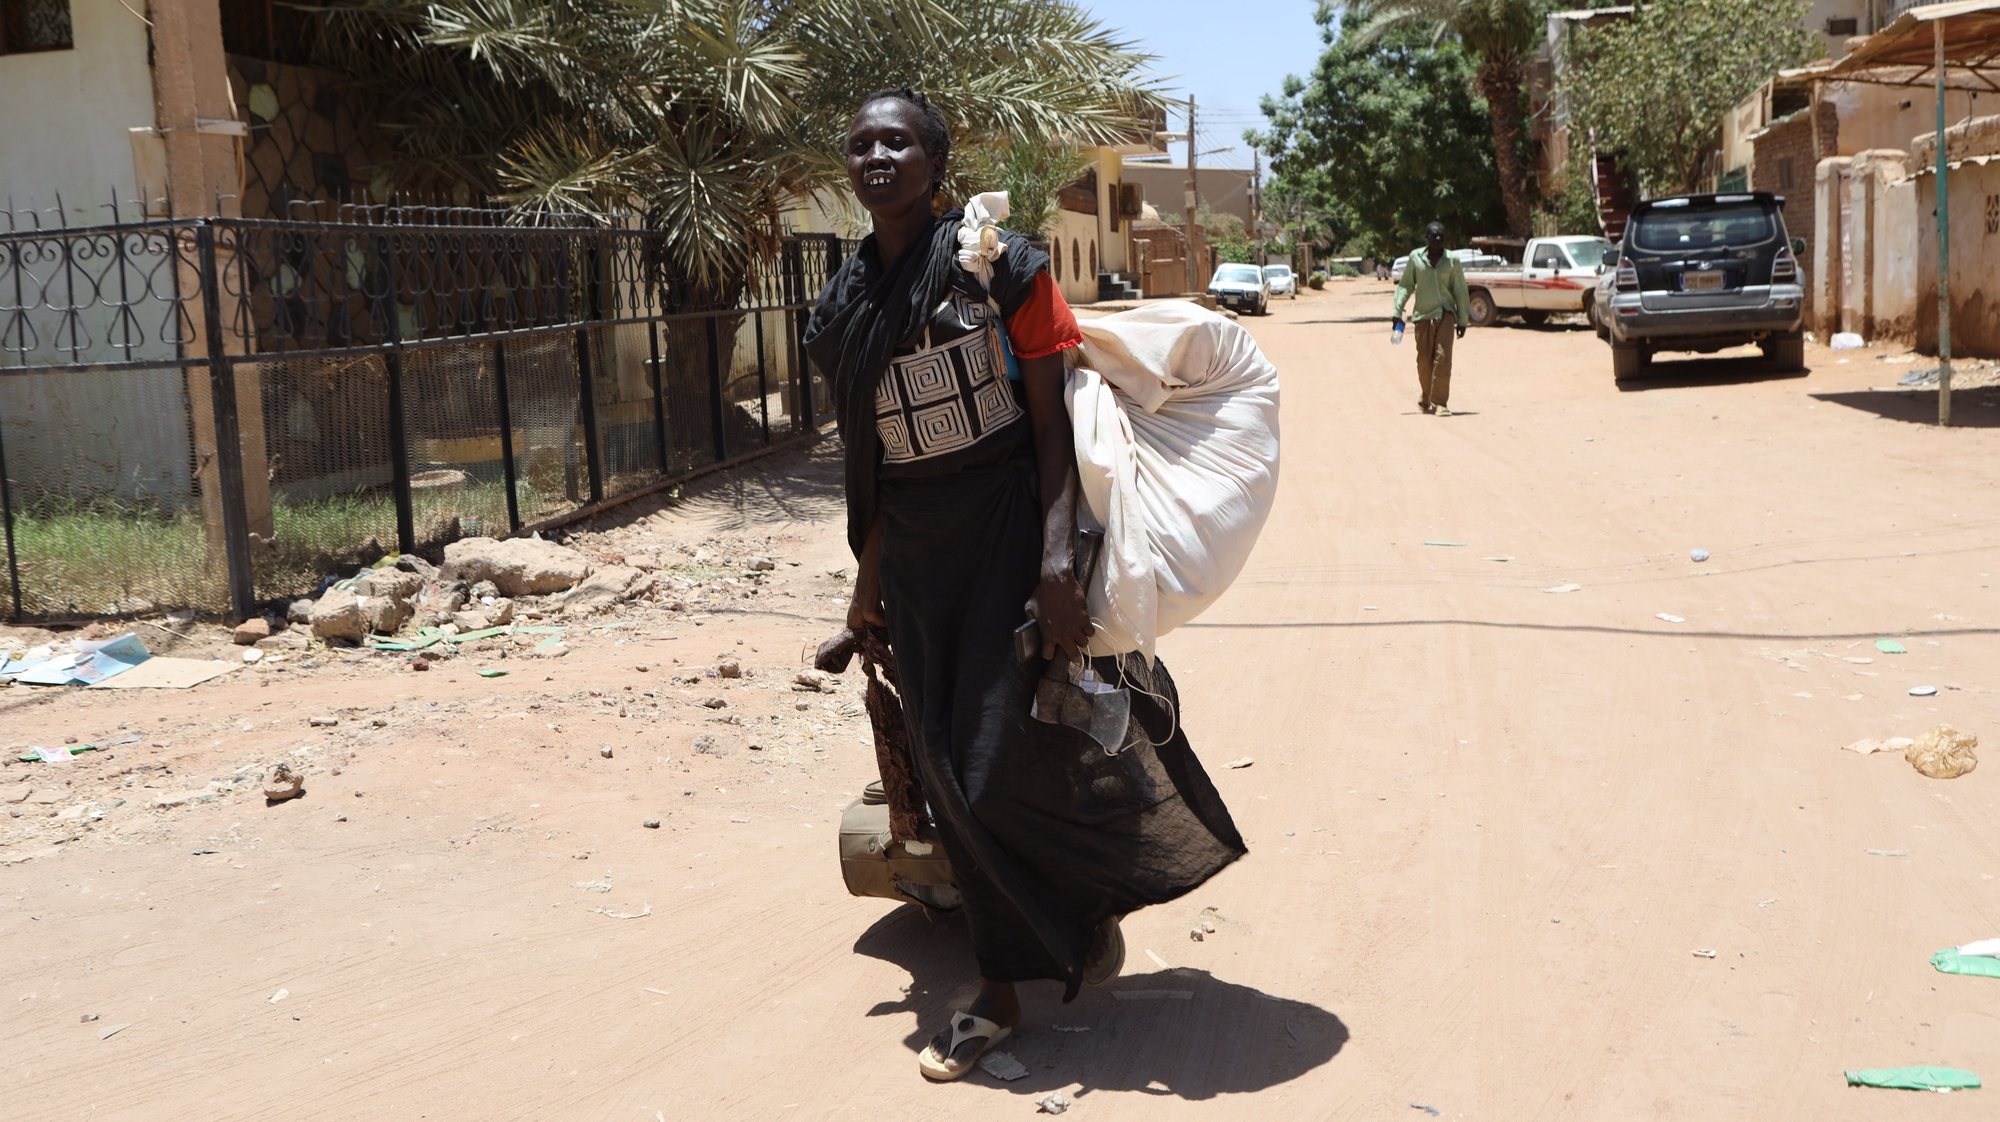 epa10579958 A Sudanese woman carries her belongings on a street in Khartoum, Sudan, 19 April 2023. A power struggle erupted since 15 April between the Sudanese army led by army Chief General Abdel Fattah al-Burhan and the paramilitaries of the Rapid Support Forces (RSF) led by General Mohamed Hamdan Dagalo, resulting in at least 200 deaths according to doctors&#039; association in Sudan.  EPA/STRINGER